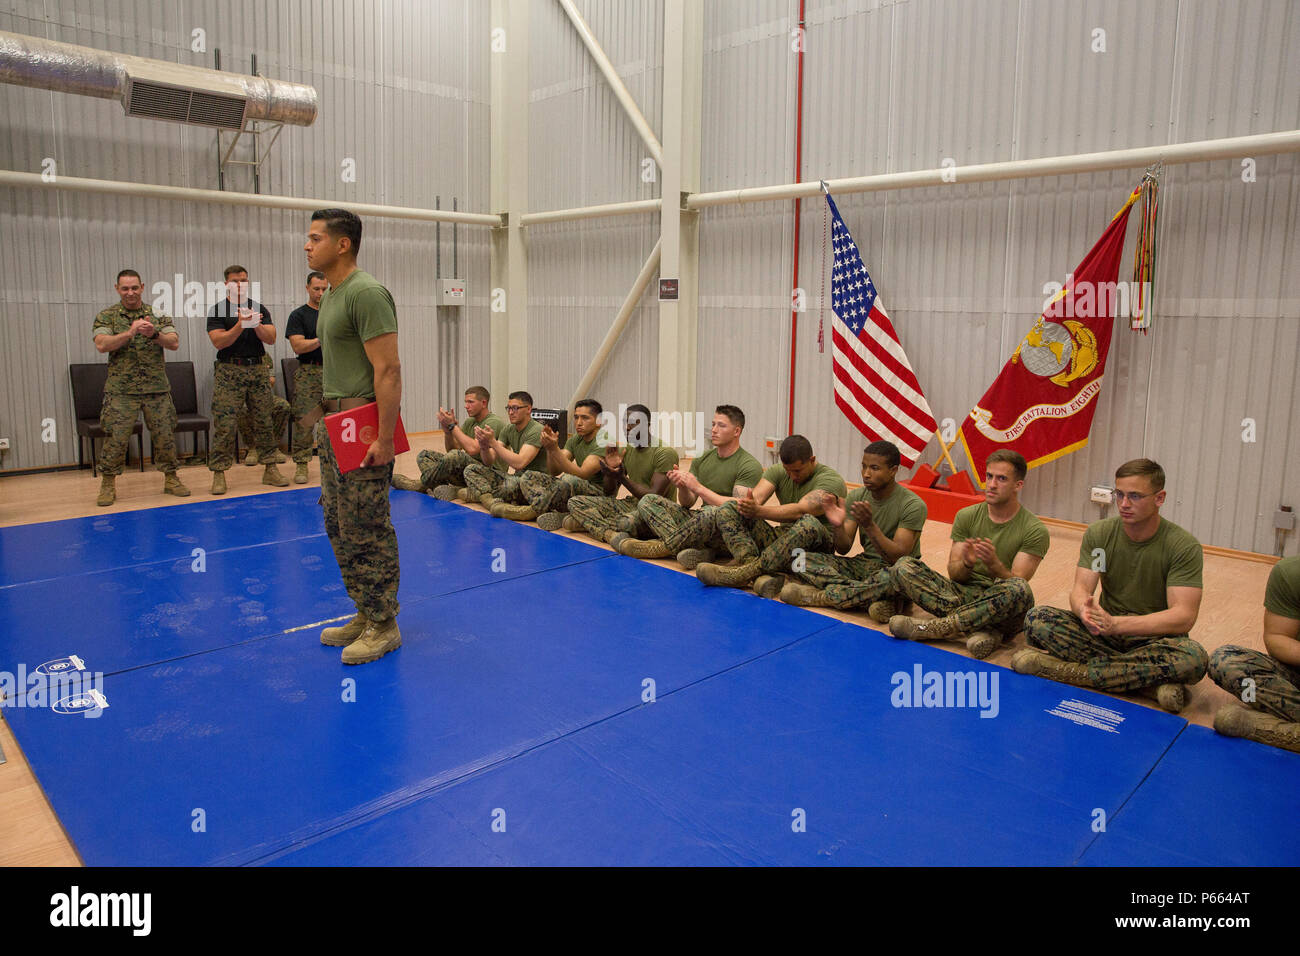 U.S. Marine Corps Sgt. Antonio Luna, a squad leader with Black Sea Rotational Force, is recognized by Marines and sailors for graduating as the honor graduate of his Marine Martial Arts Instructor Course, aboard Mihail Kognalniceanu Air Base, Romania, April 22, 2016. These graduates spent three weeks enduring physical training sessions, learning how to correctly give hip-pocket classes, and how to properly teach techniques of all belt levels of the Marine Corps Martial-Arts Program. (U.S. Marine Corps photo by Cpl. Kelly L. Street, 2D MARDIV COMCAM/Released) Stock Photo